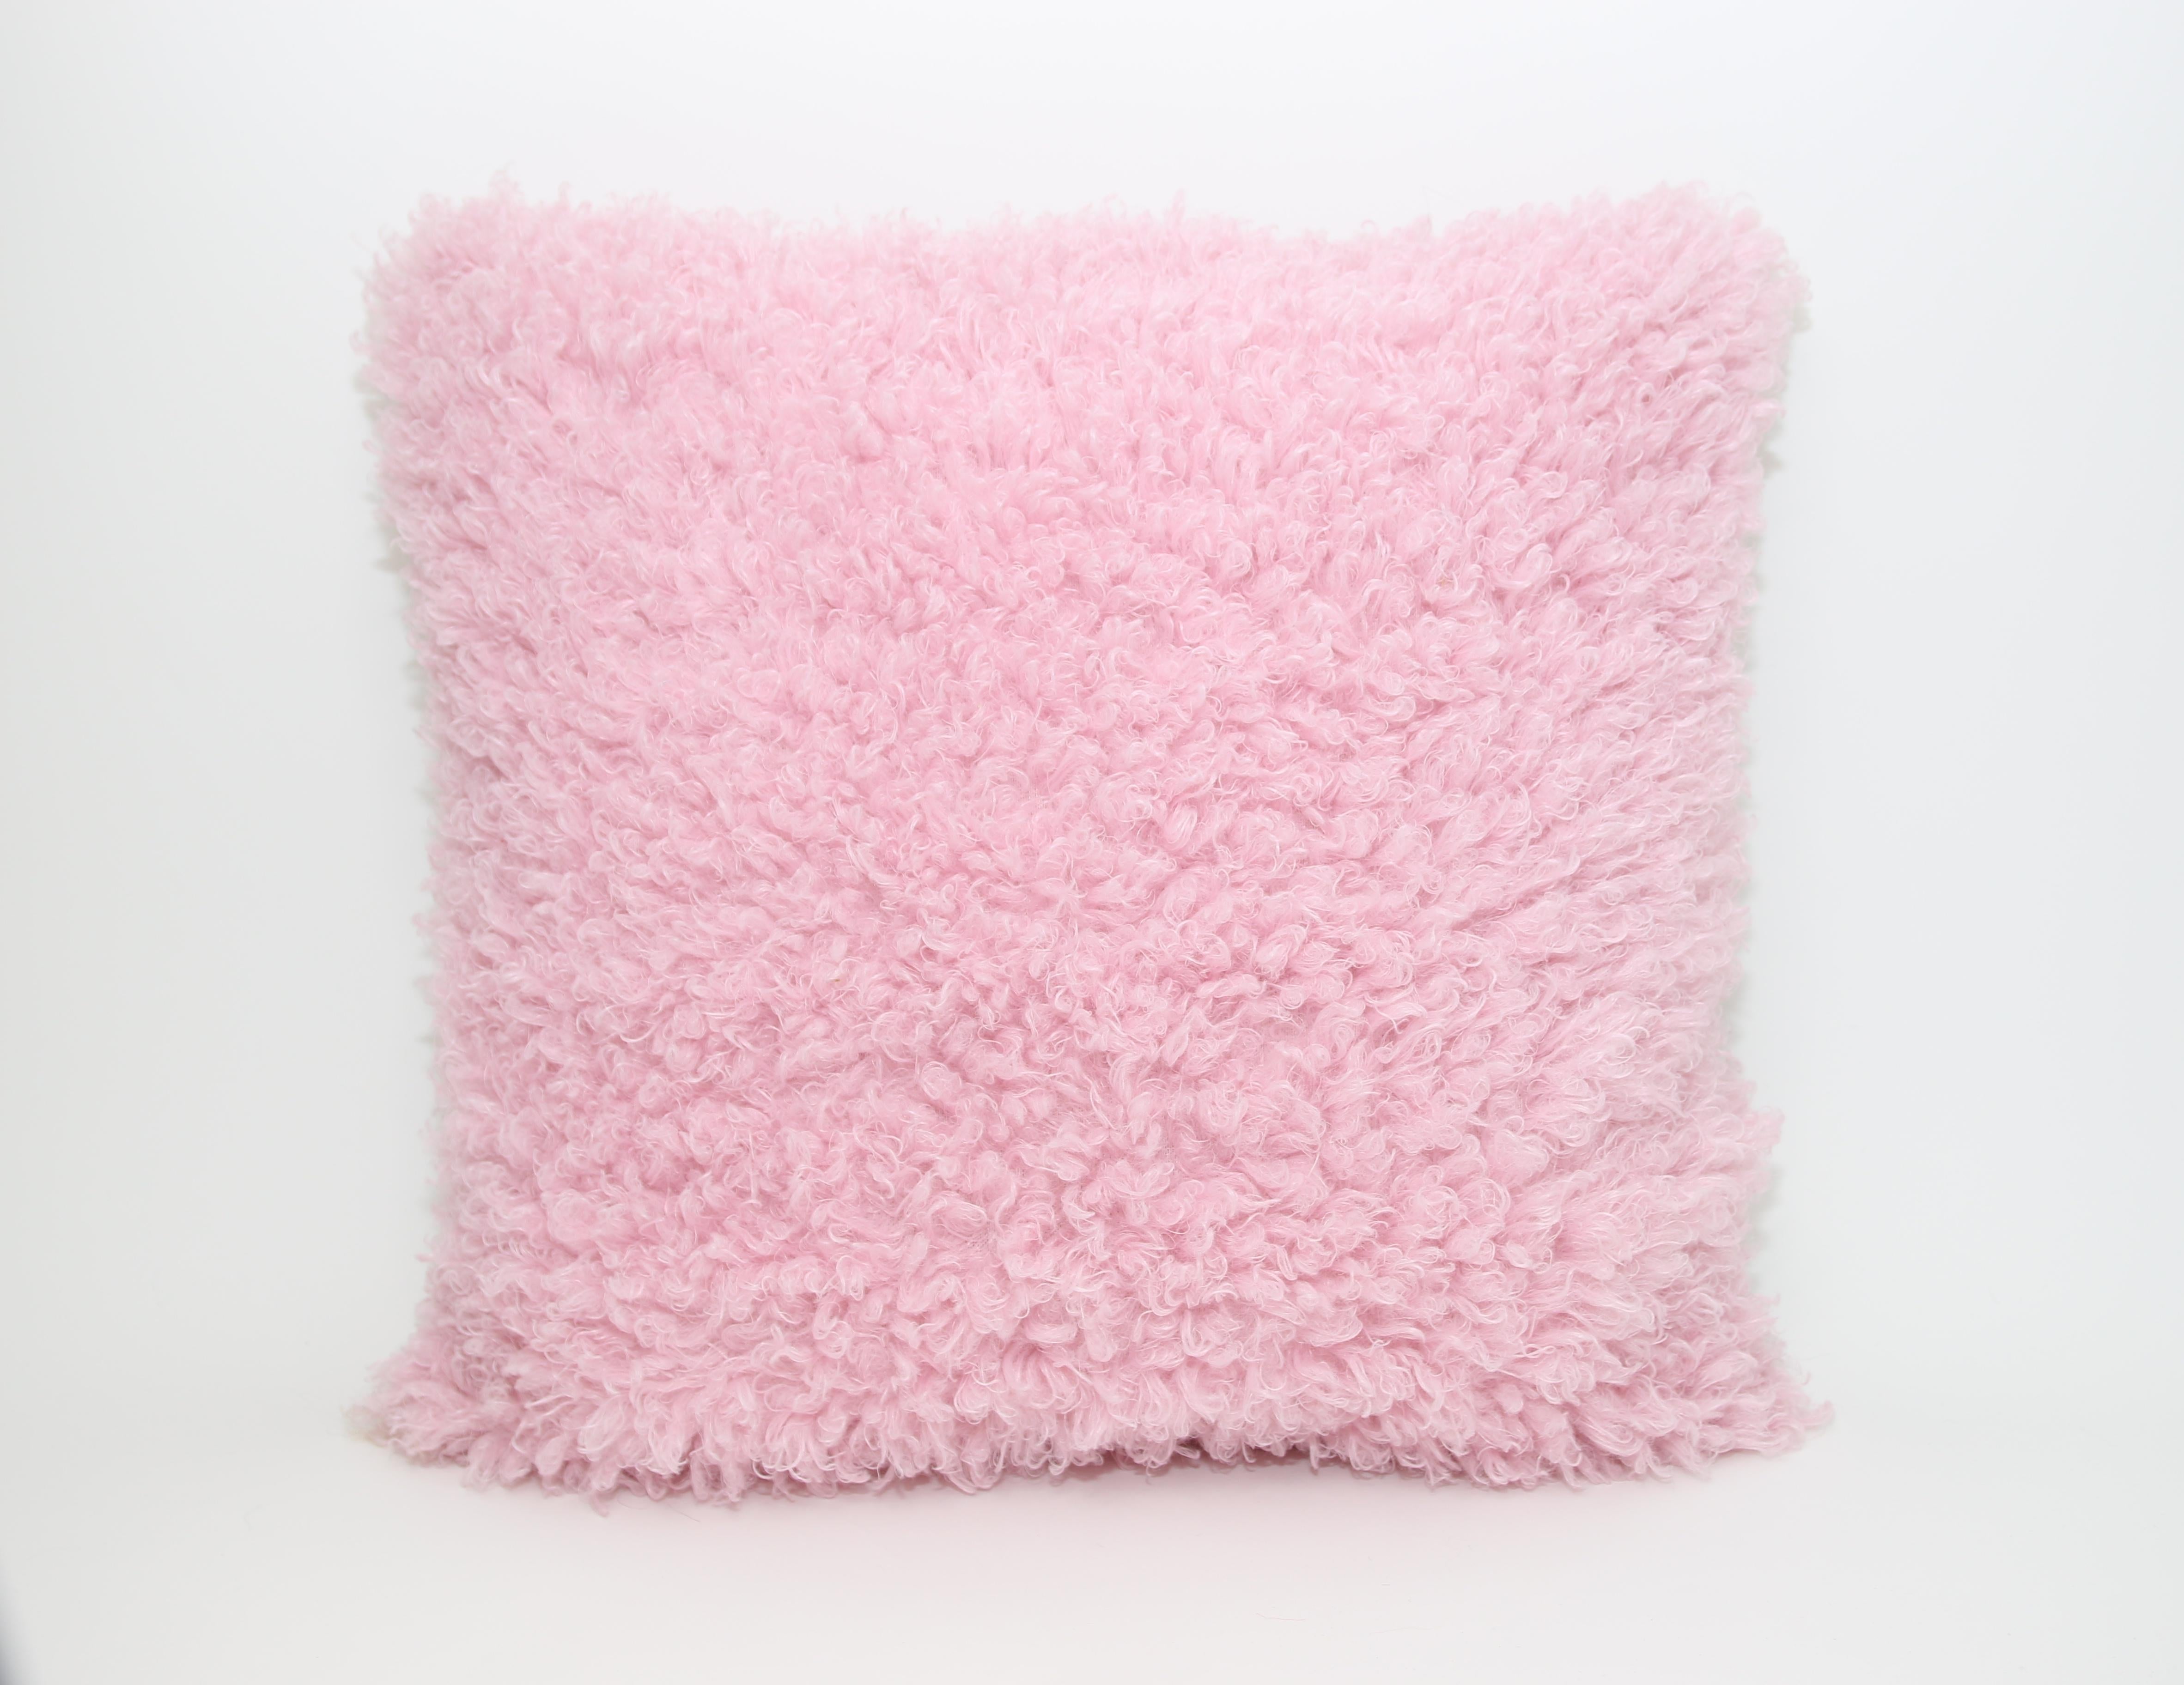 This pair of Pelush pink poodle faux fur pillows are made with a custom boucle' poly fabric and recycled Italian silk backing. The inside filling is down alternative. Match these cotton candy large pink fake fur pillows with the same throw blanket